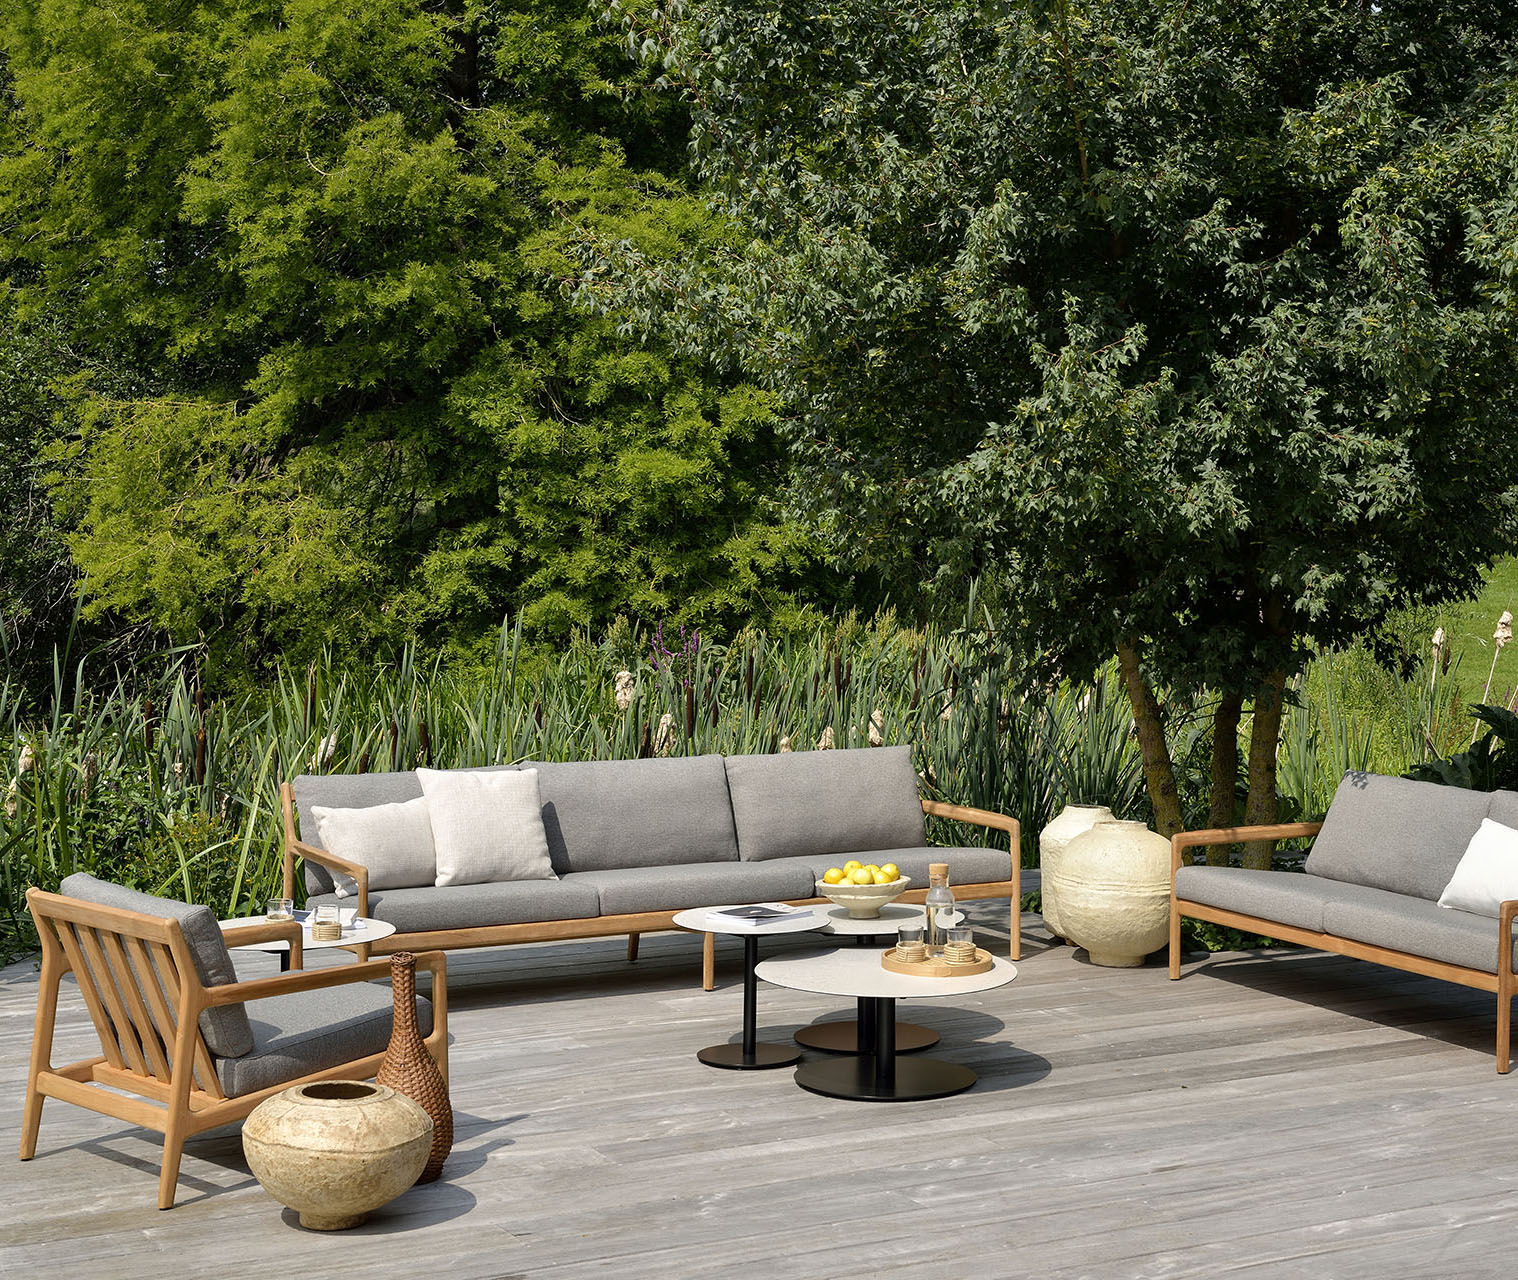 Jack Outdoor 3 Seater Sofa - More Options